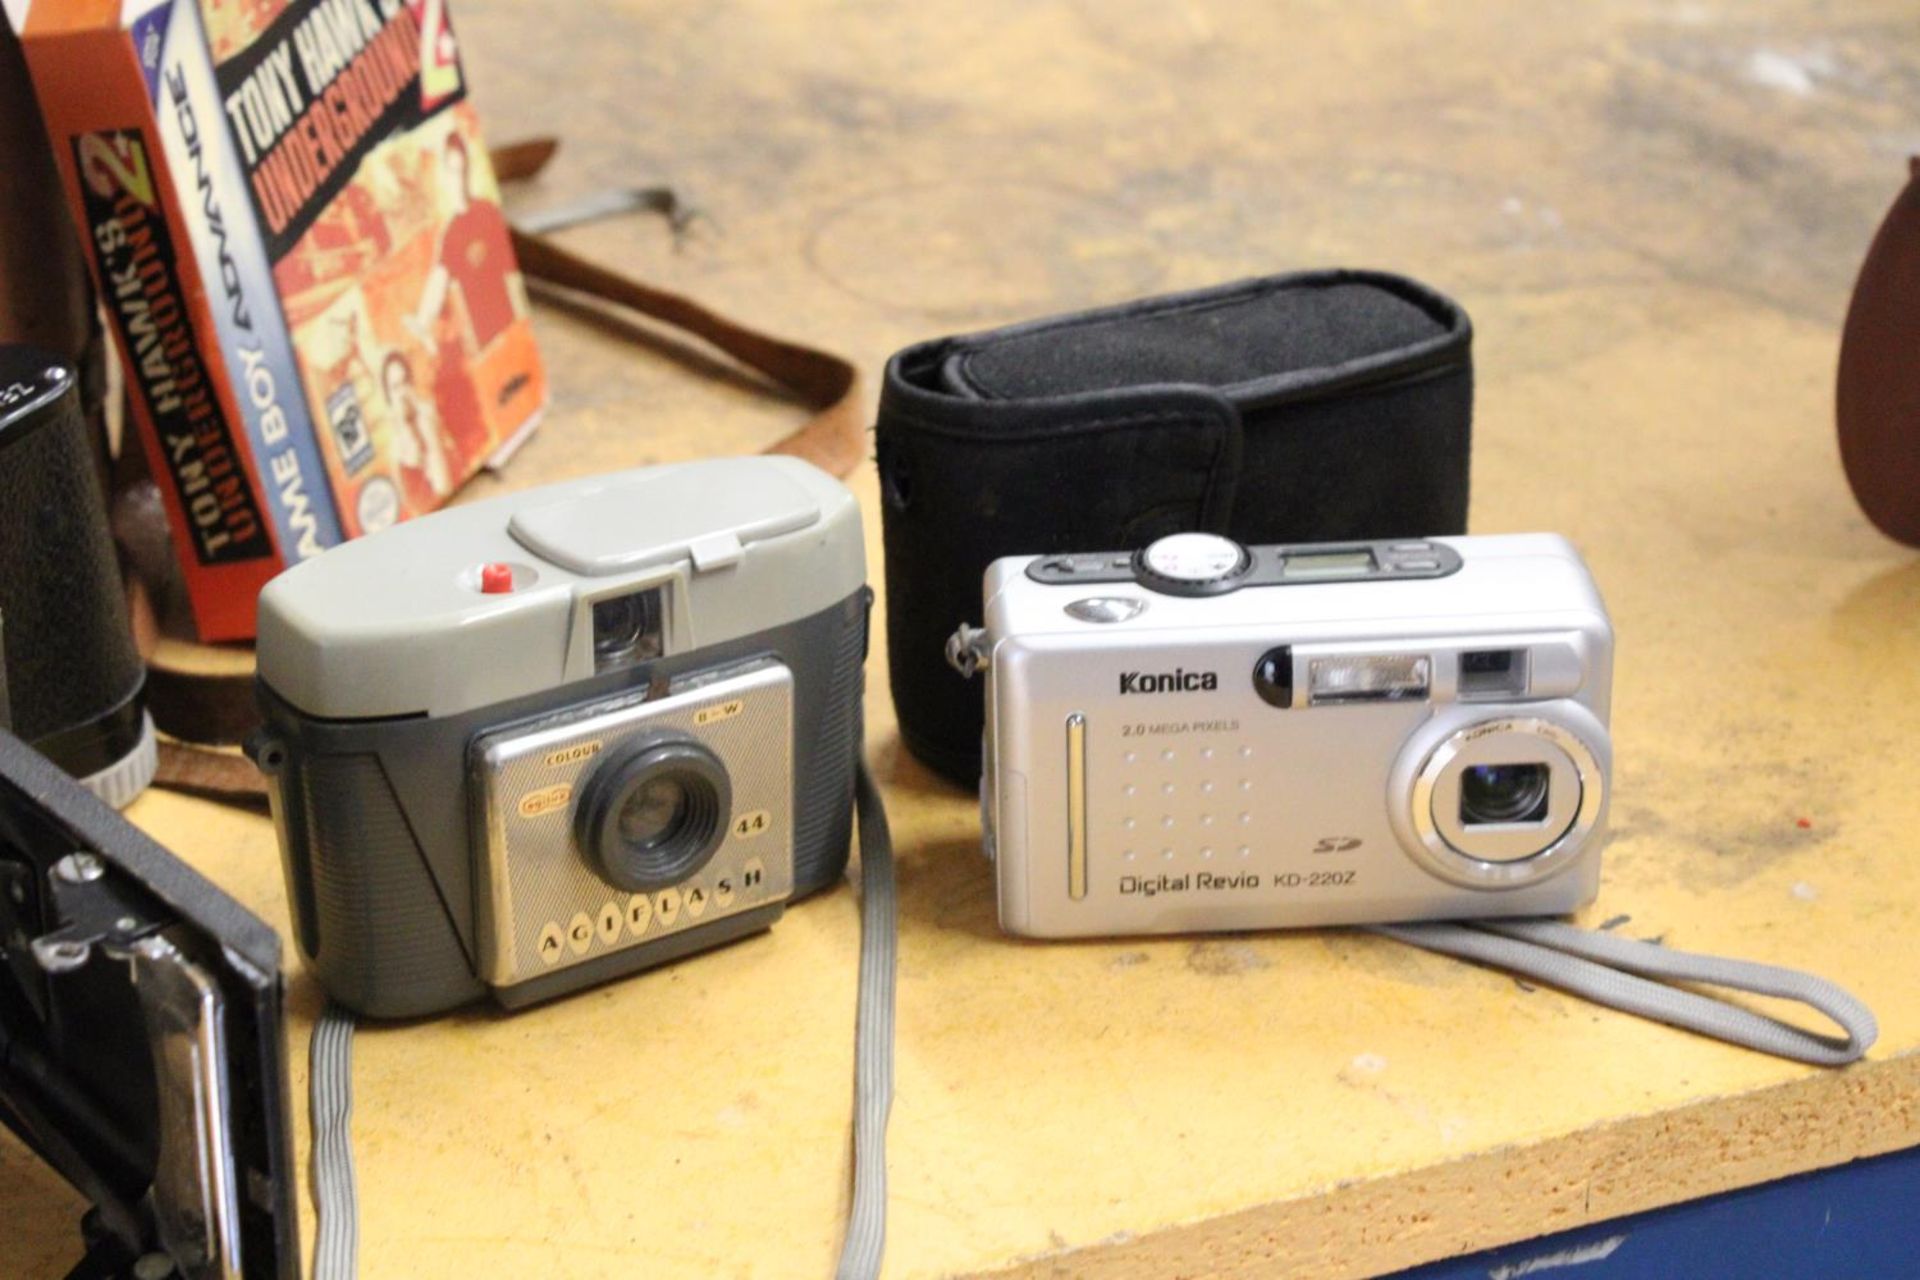 A COLLECTION OF VINTAGE CAMERAS TO INCLUDE A SIX 20 KODAK, AGILUX AGIFLASH, SONY CYBERSHOT, KONICA - Image 7 of 7